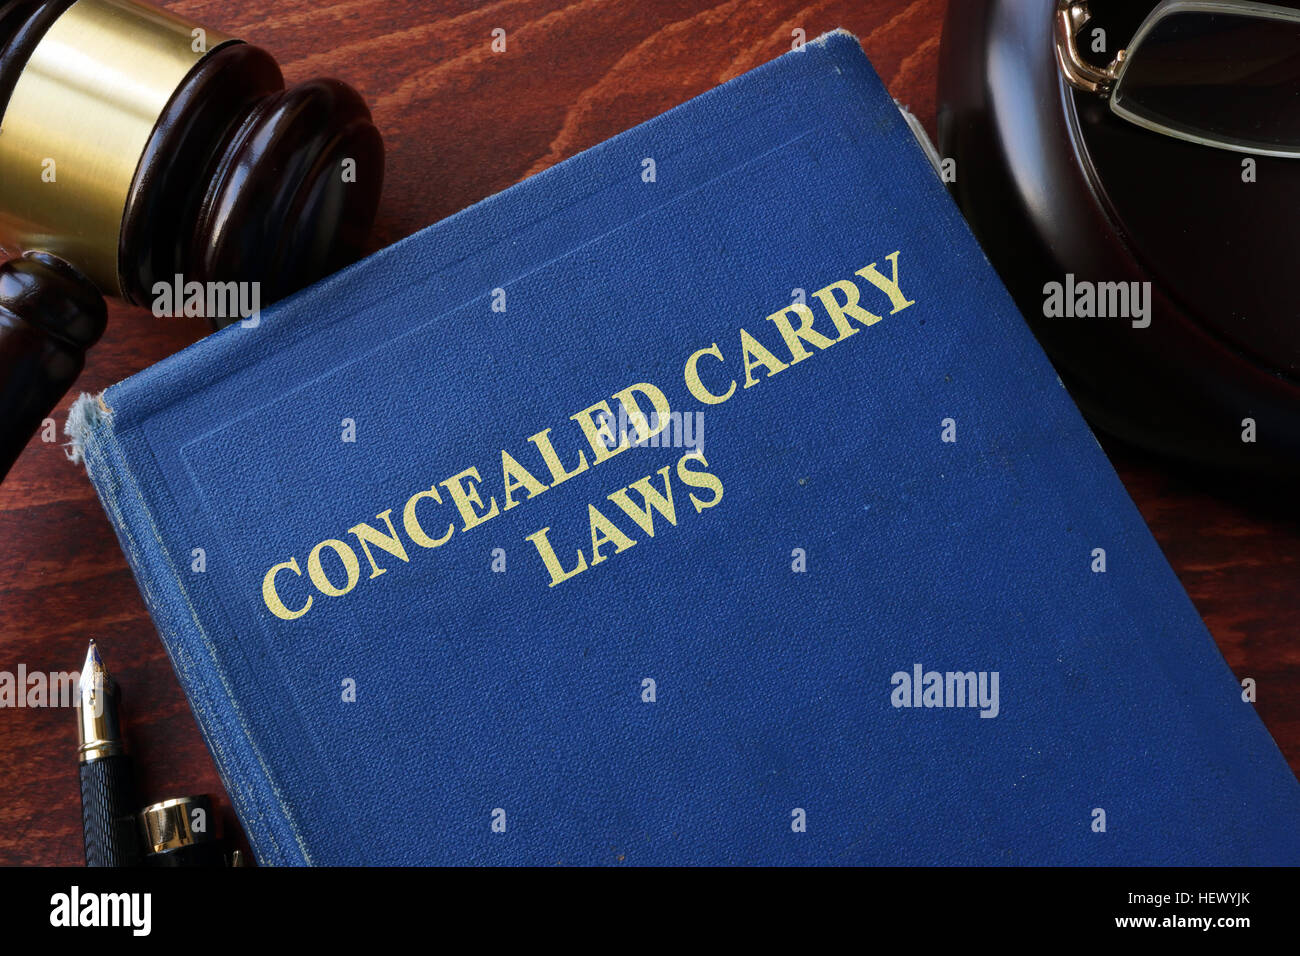 Concealed Carry Laws title on a book and gavel. Stock Photo